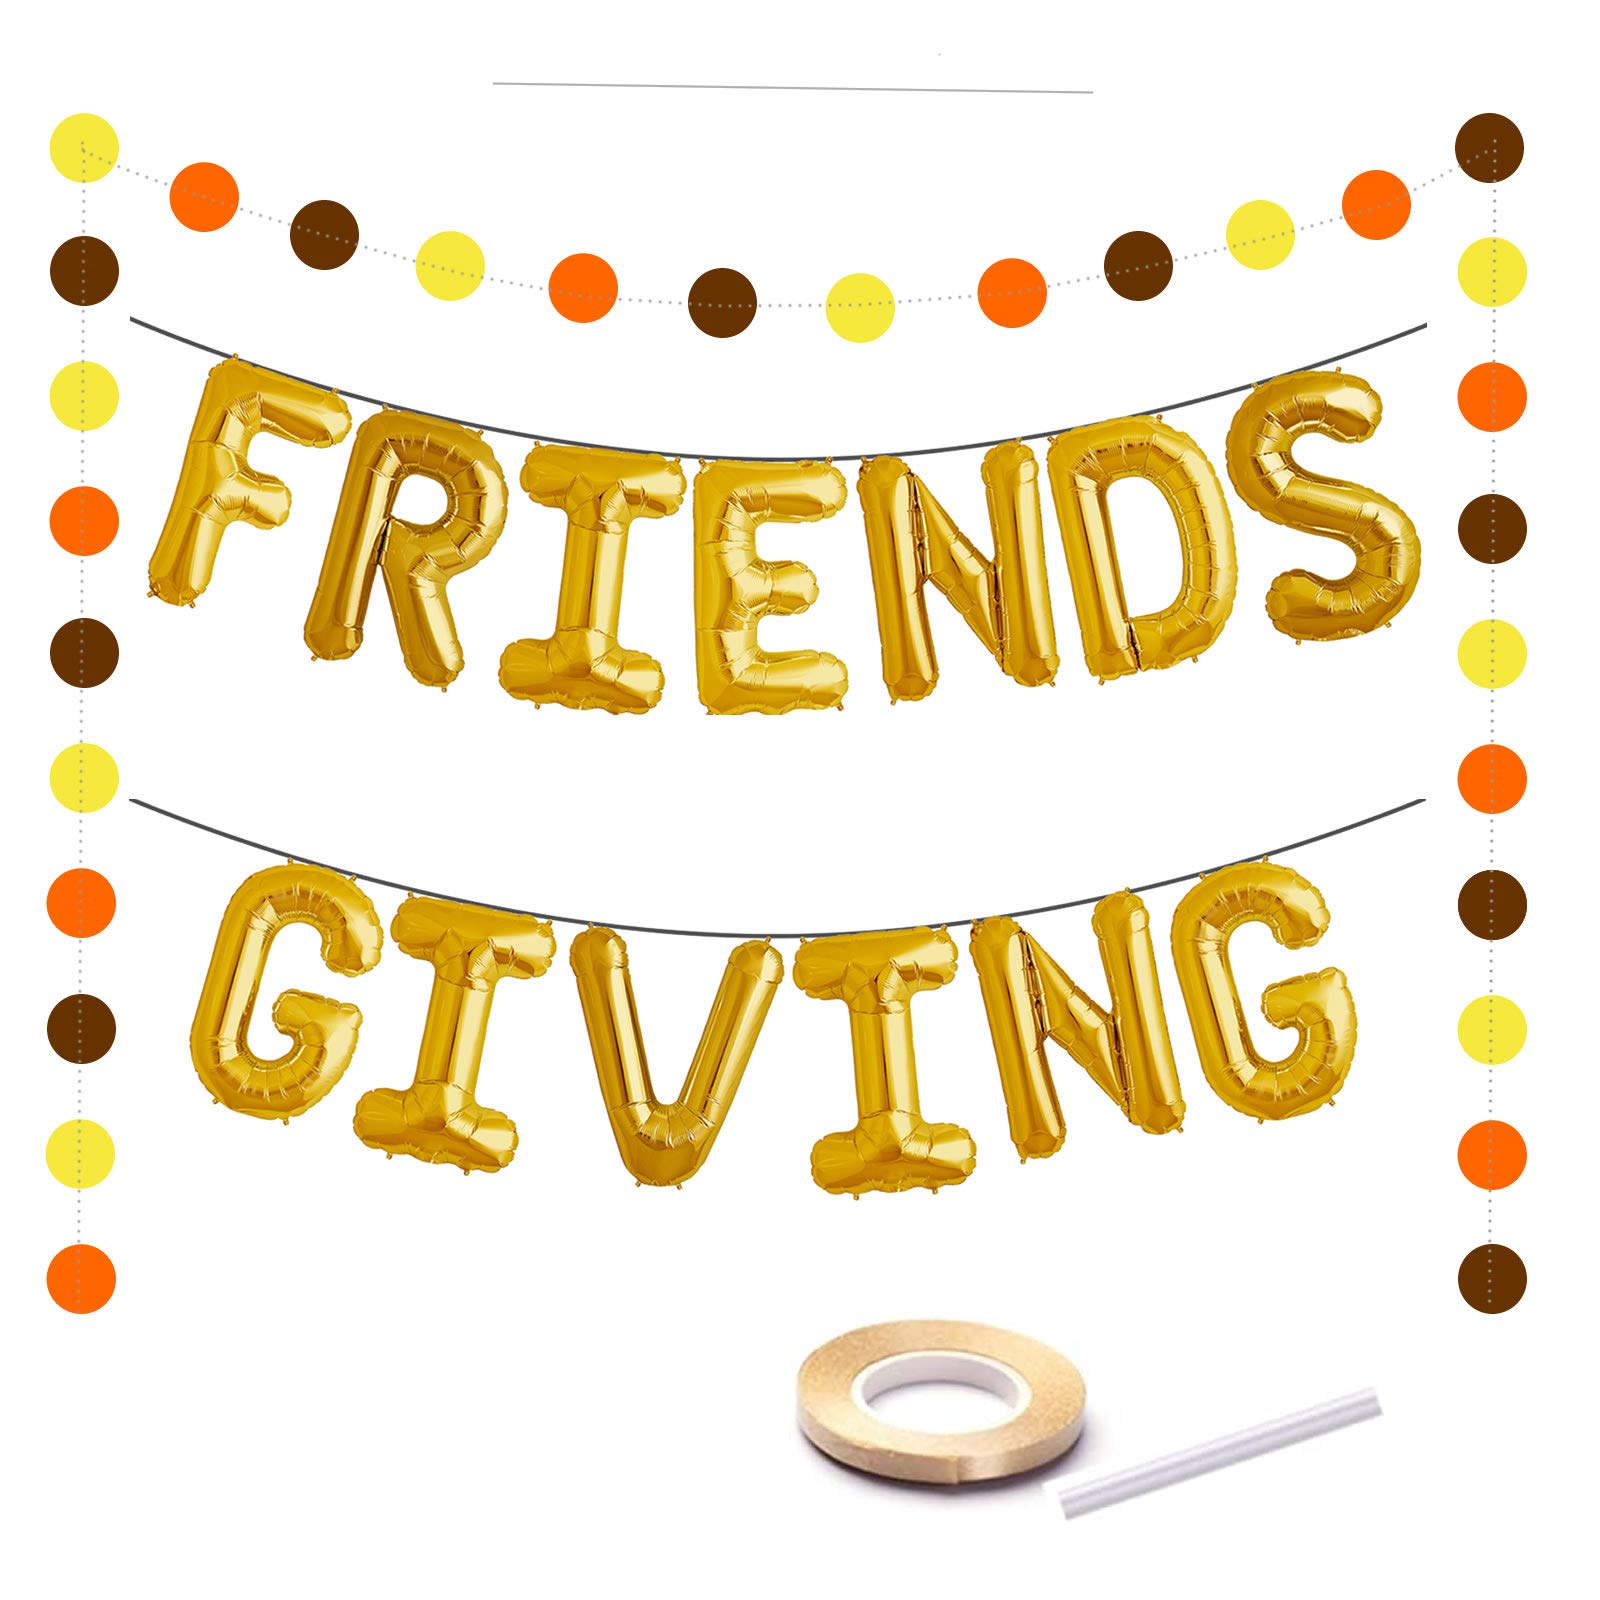 Friends Giving Decoration Gold Foil Letter 16 Inches Tall Balloons Banner Thanksgiving Centerpiece Friends Party Backdrop Fall Decor Circle Dots Garlands…